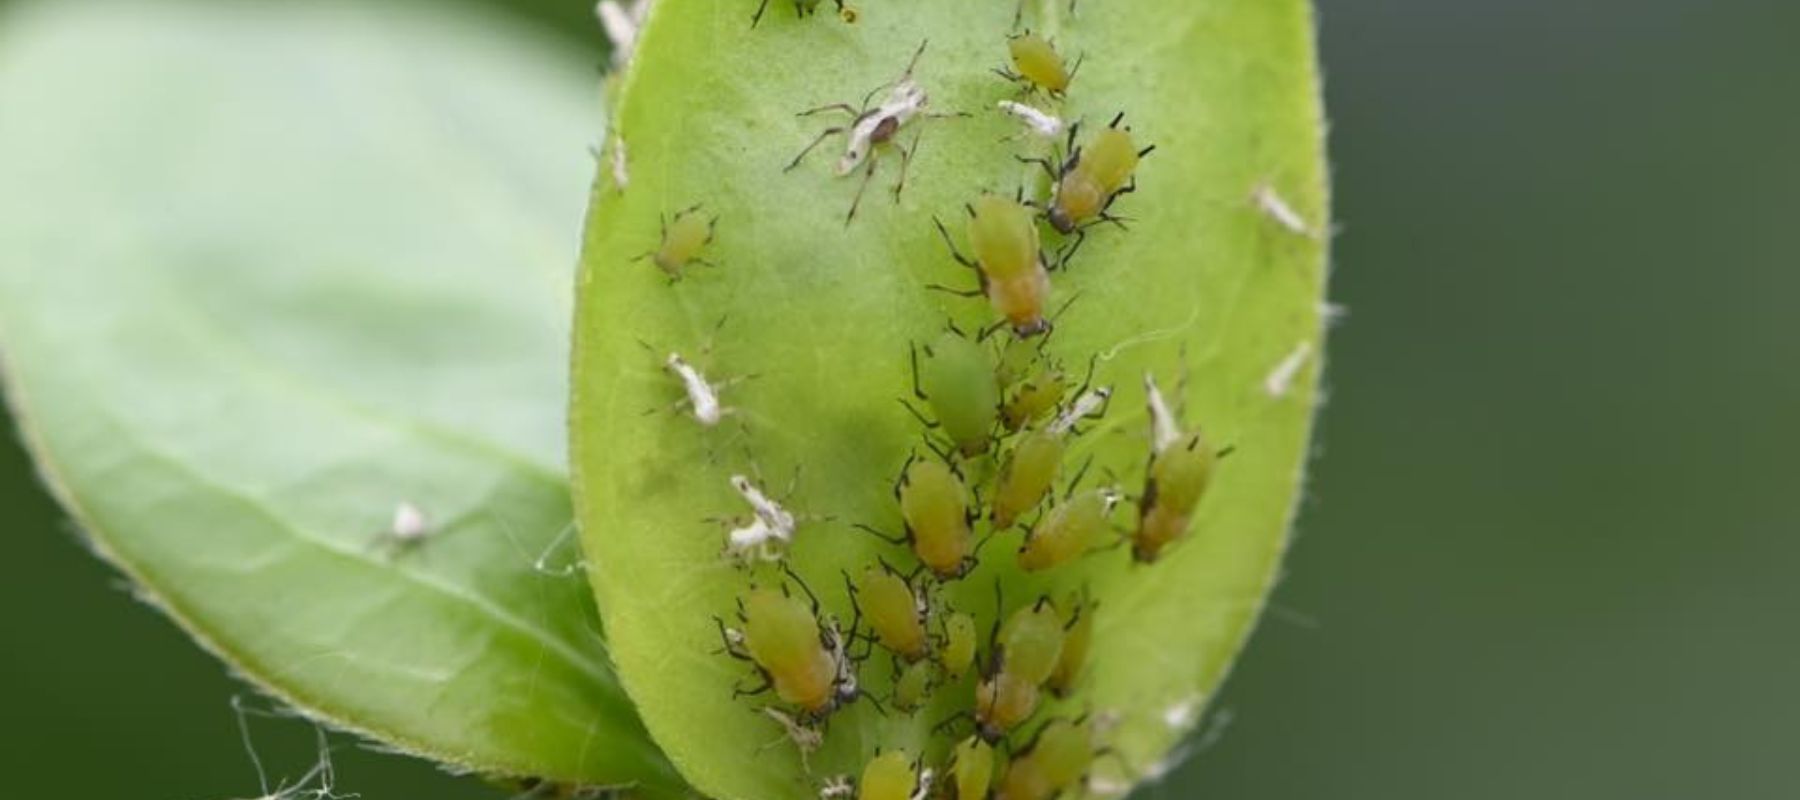 Aphids - What are they and how to treat